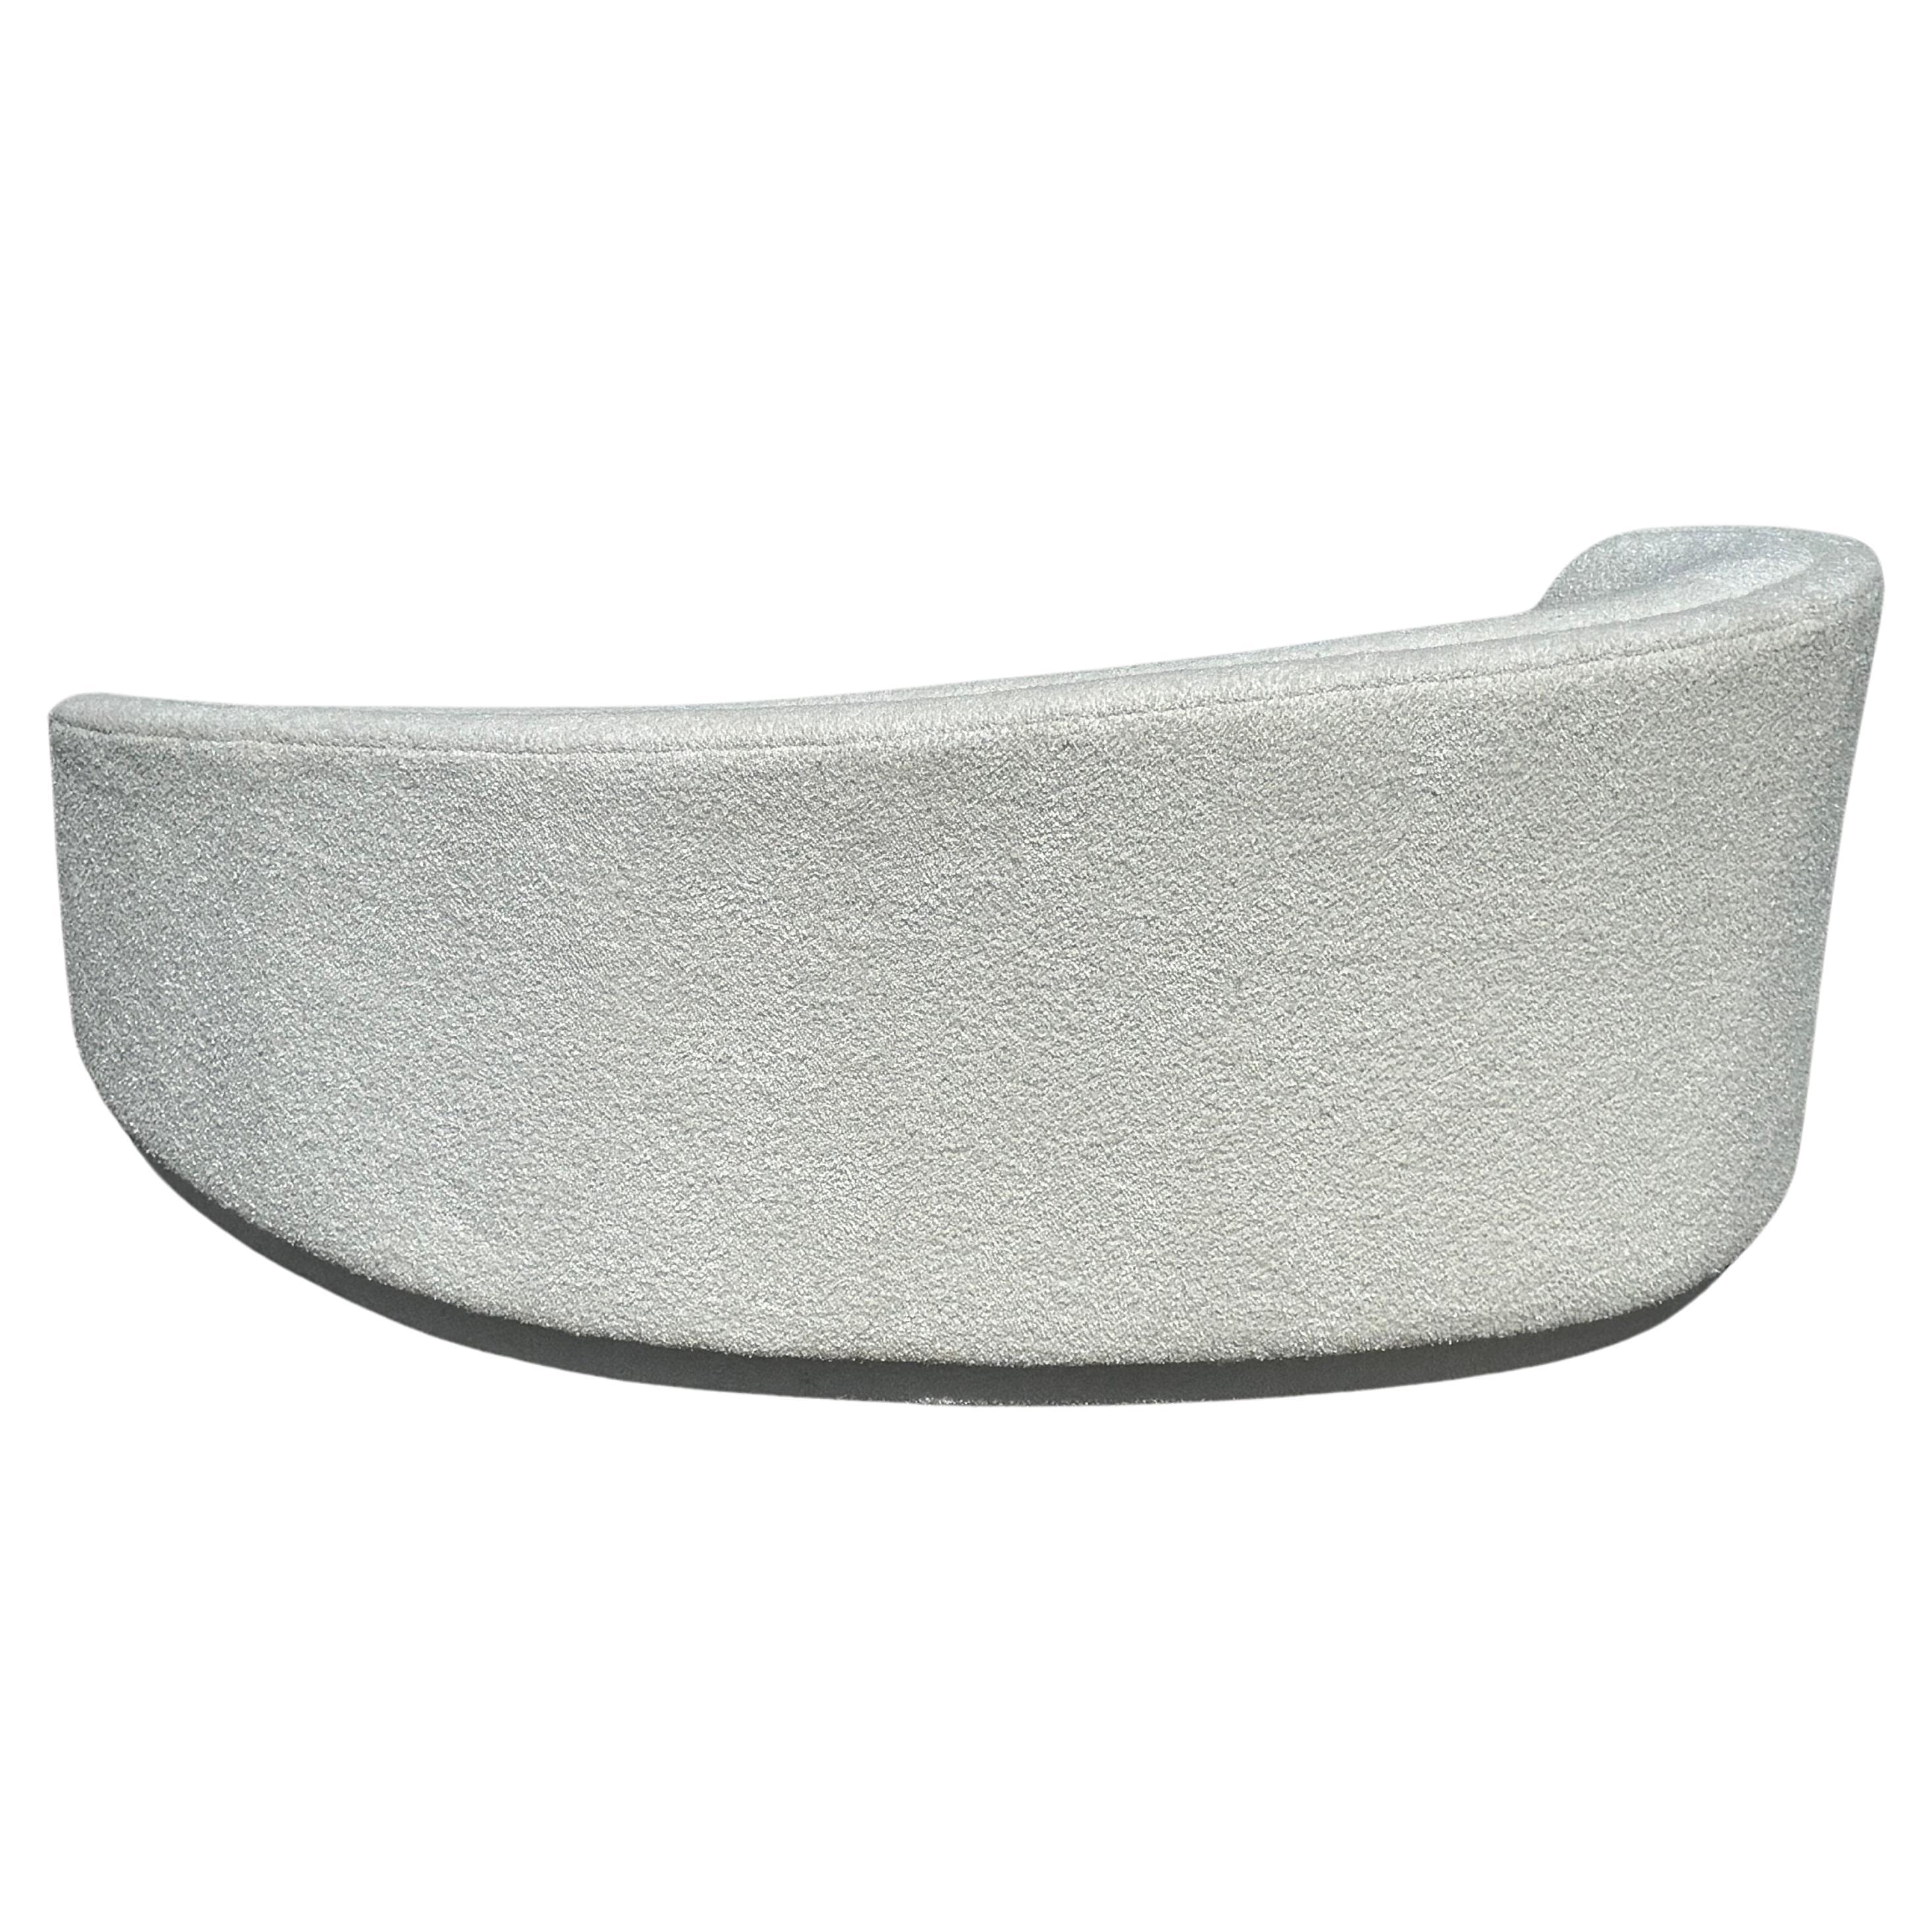 1980s Glamours Curved Sofa - Chaise by Vladimir Kagan for Weiman in White Bouclé For Sale 4